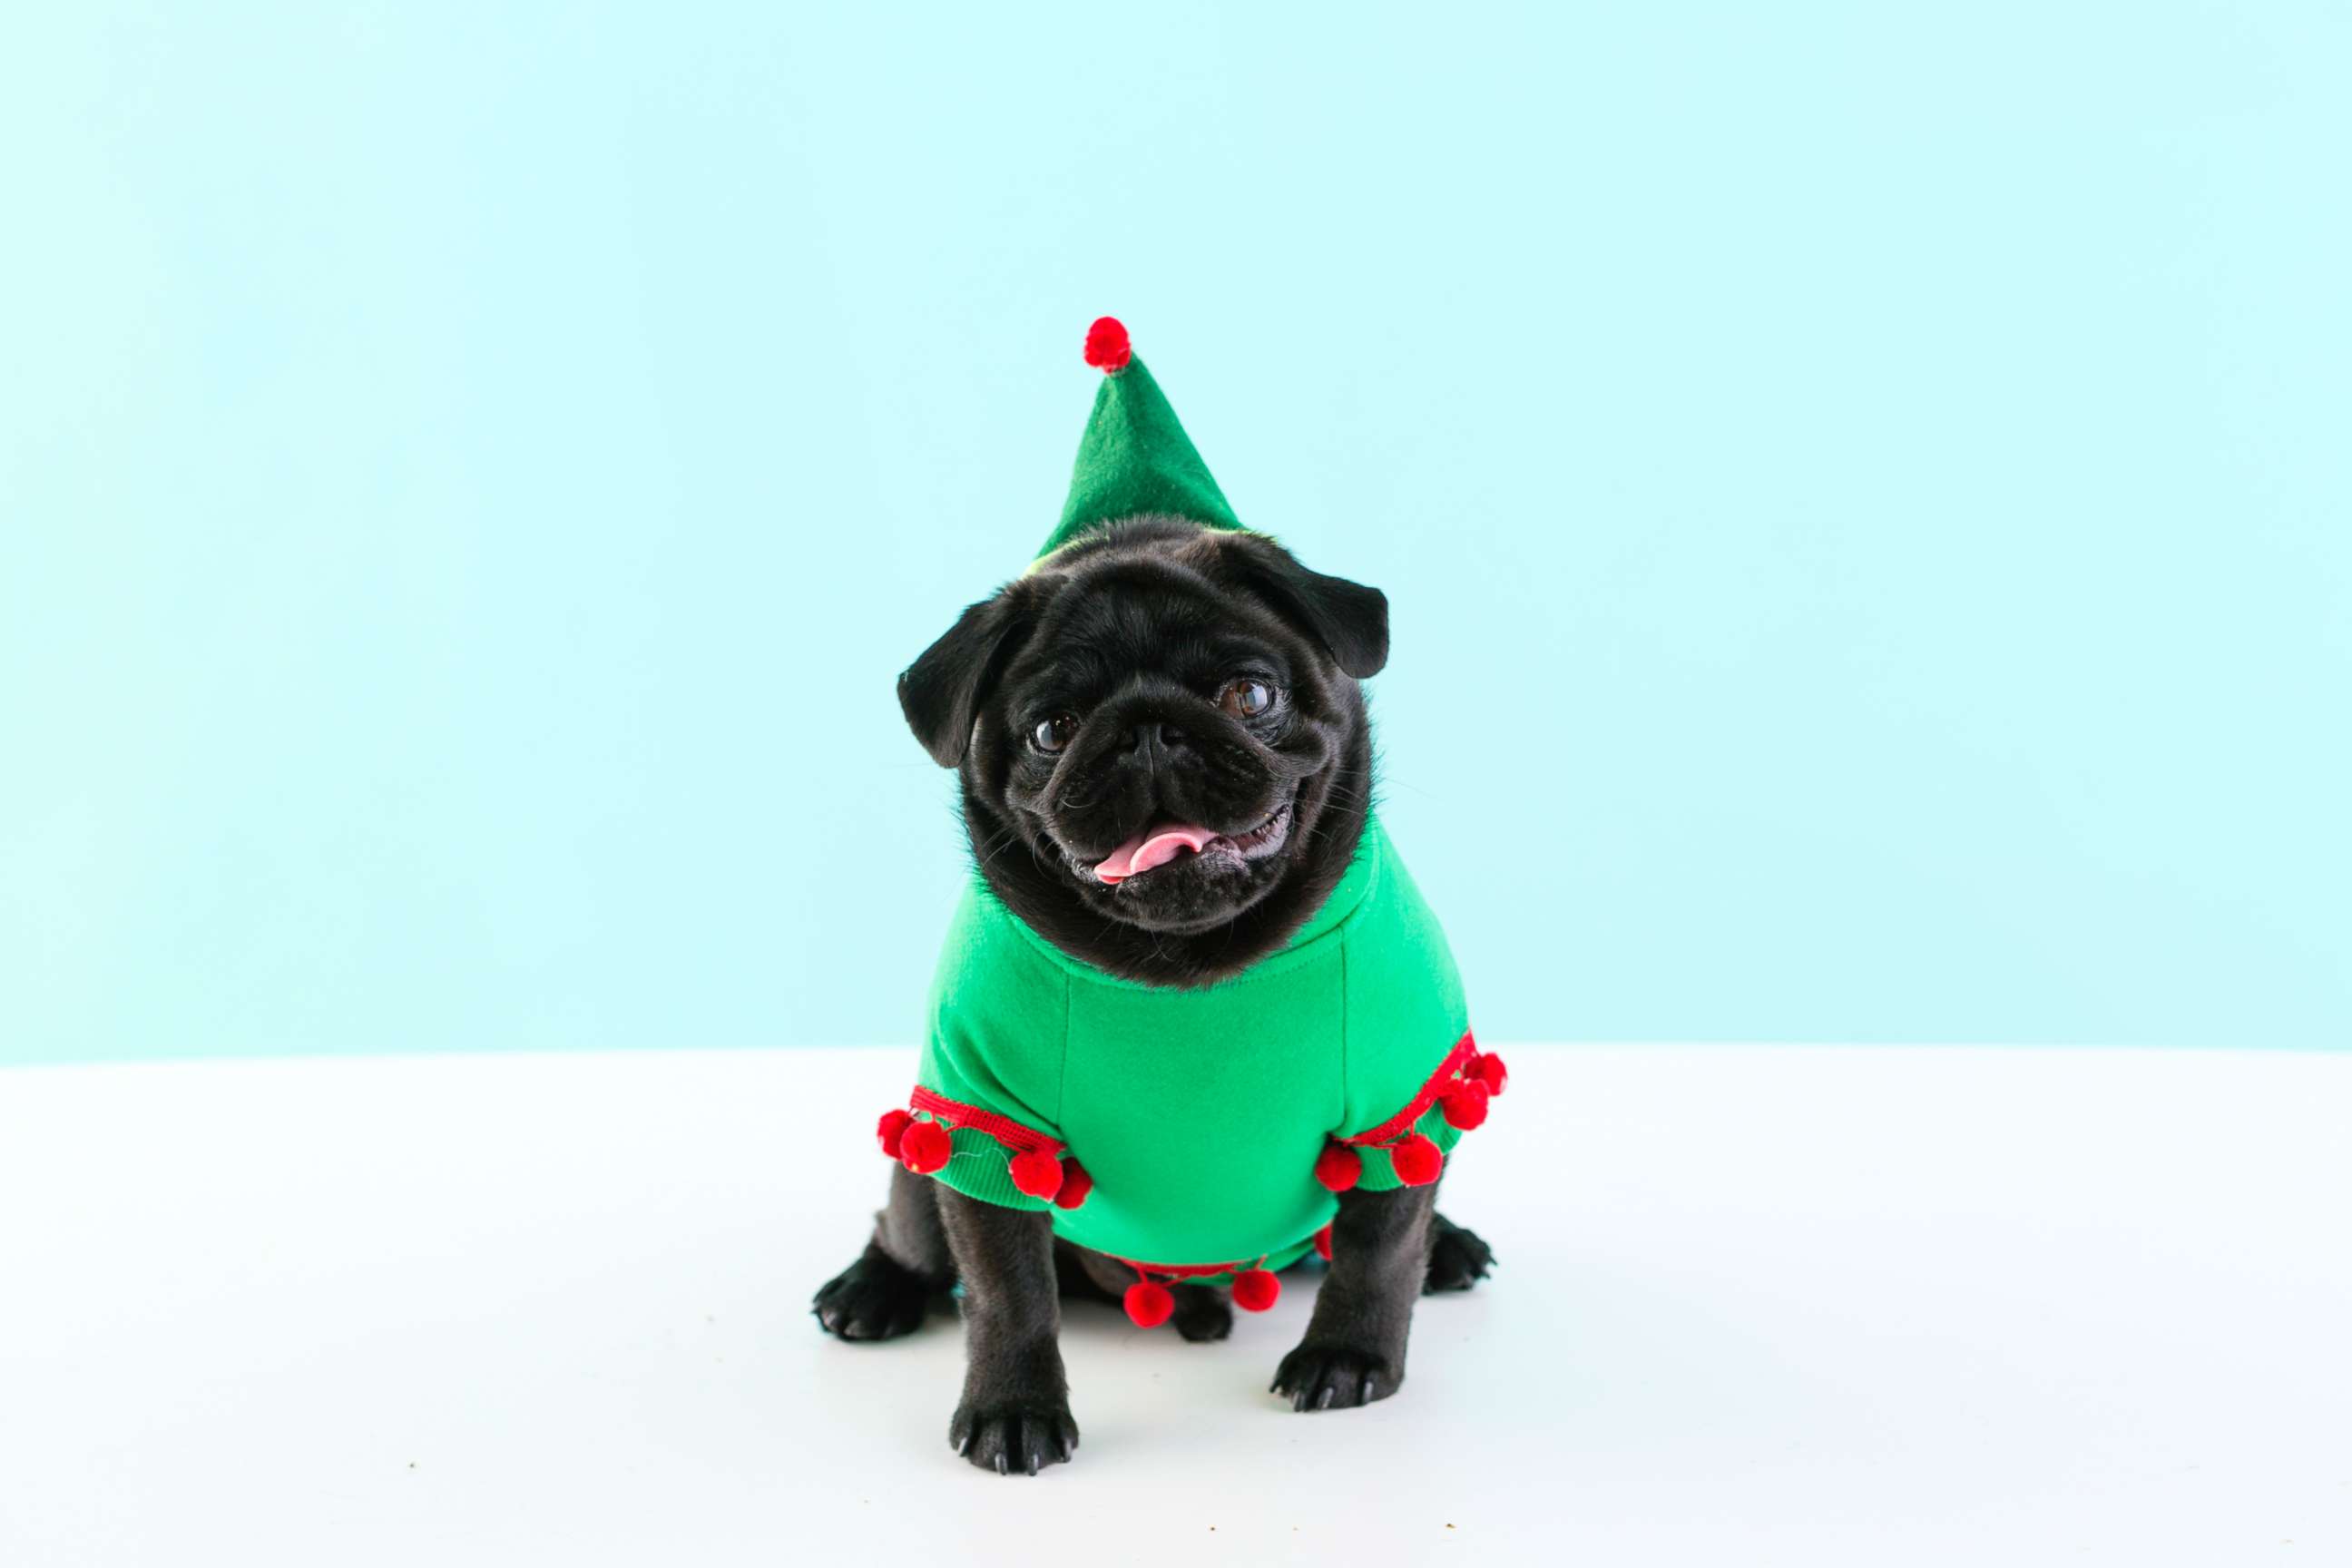 PHOTO: Turn your dog into a little elf with a green sweater decked out in pom-pom trim and felt patches. 